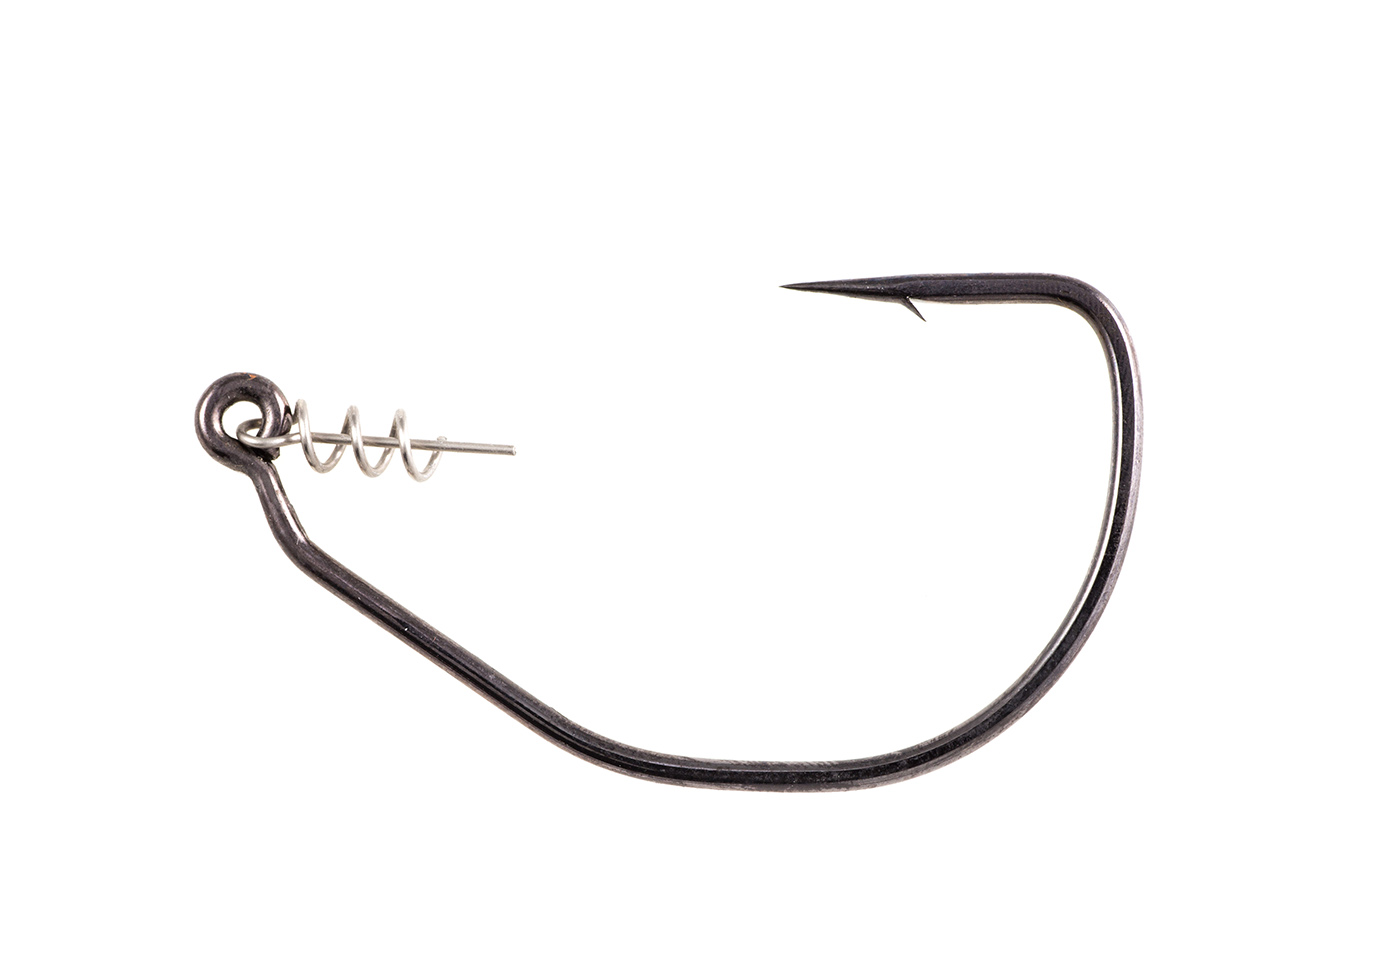 Owner Hooks - AND you thought the 12/0 Beast Hook was